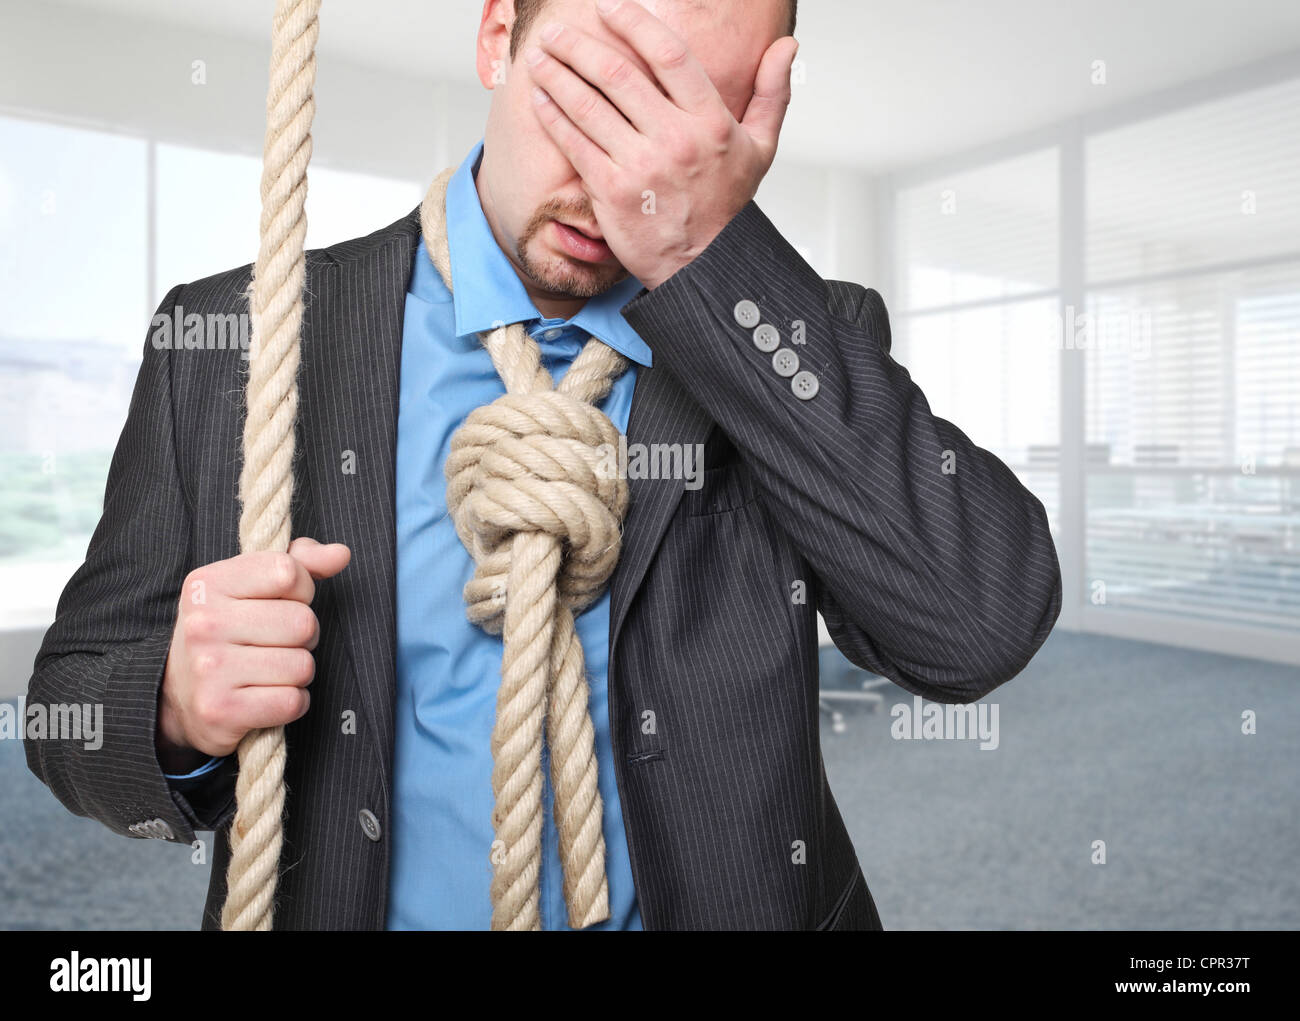 man-going-to-suicide-in-his-office-CPR37T.jpg